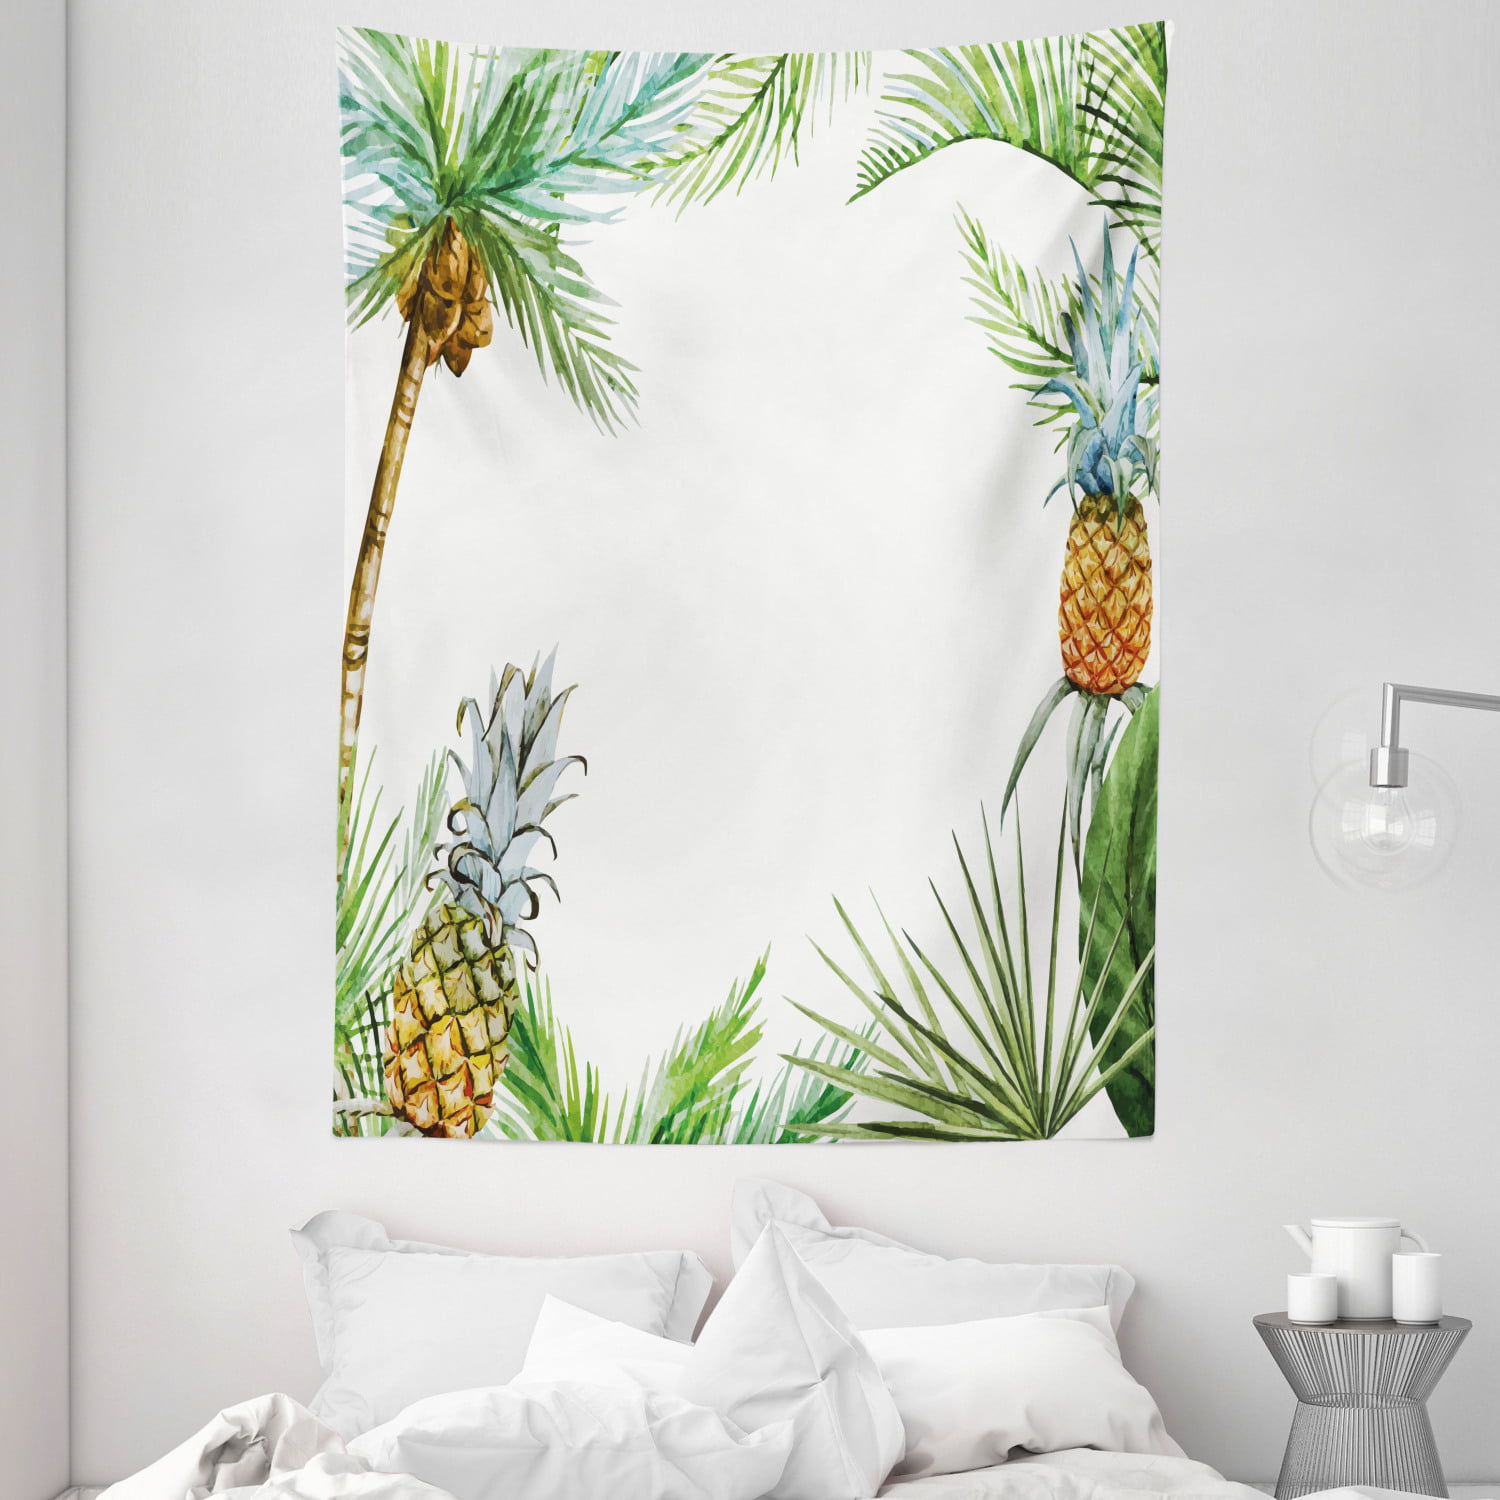 Palm Trees Tropical Island Tapestry Wall Hanging for Bedroom Living Room Decor